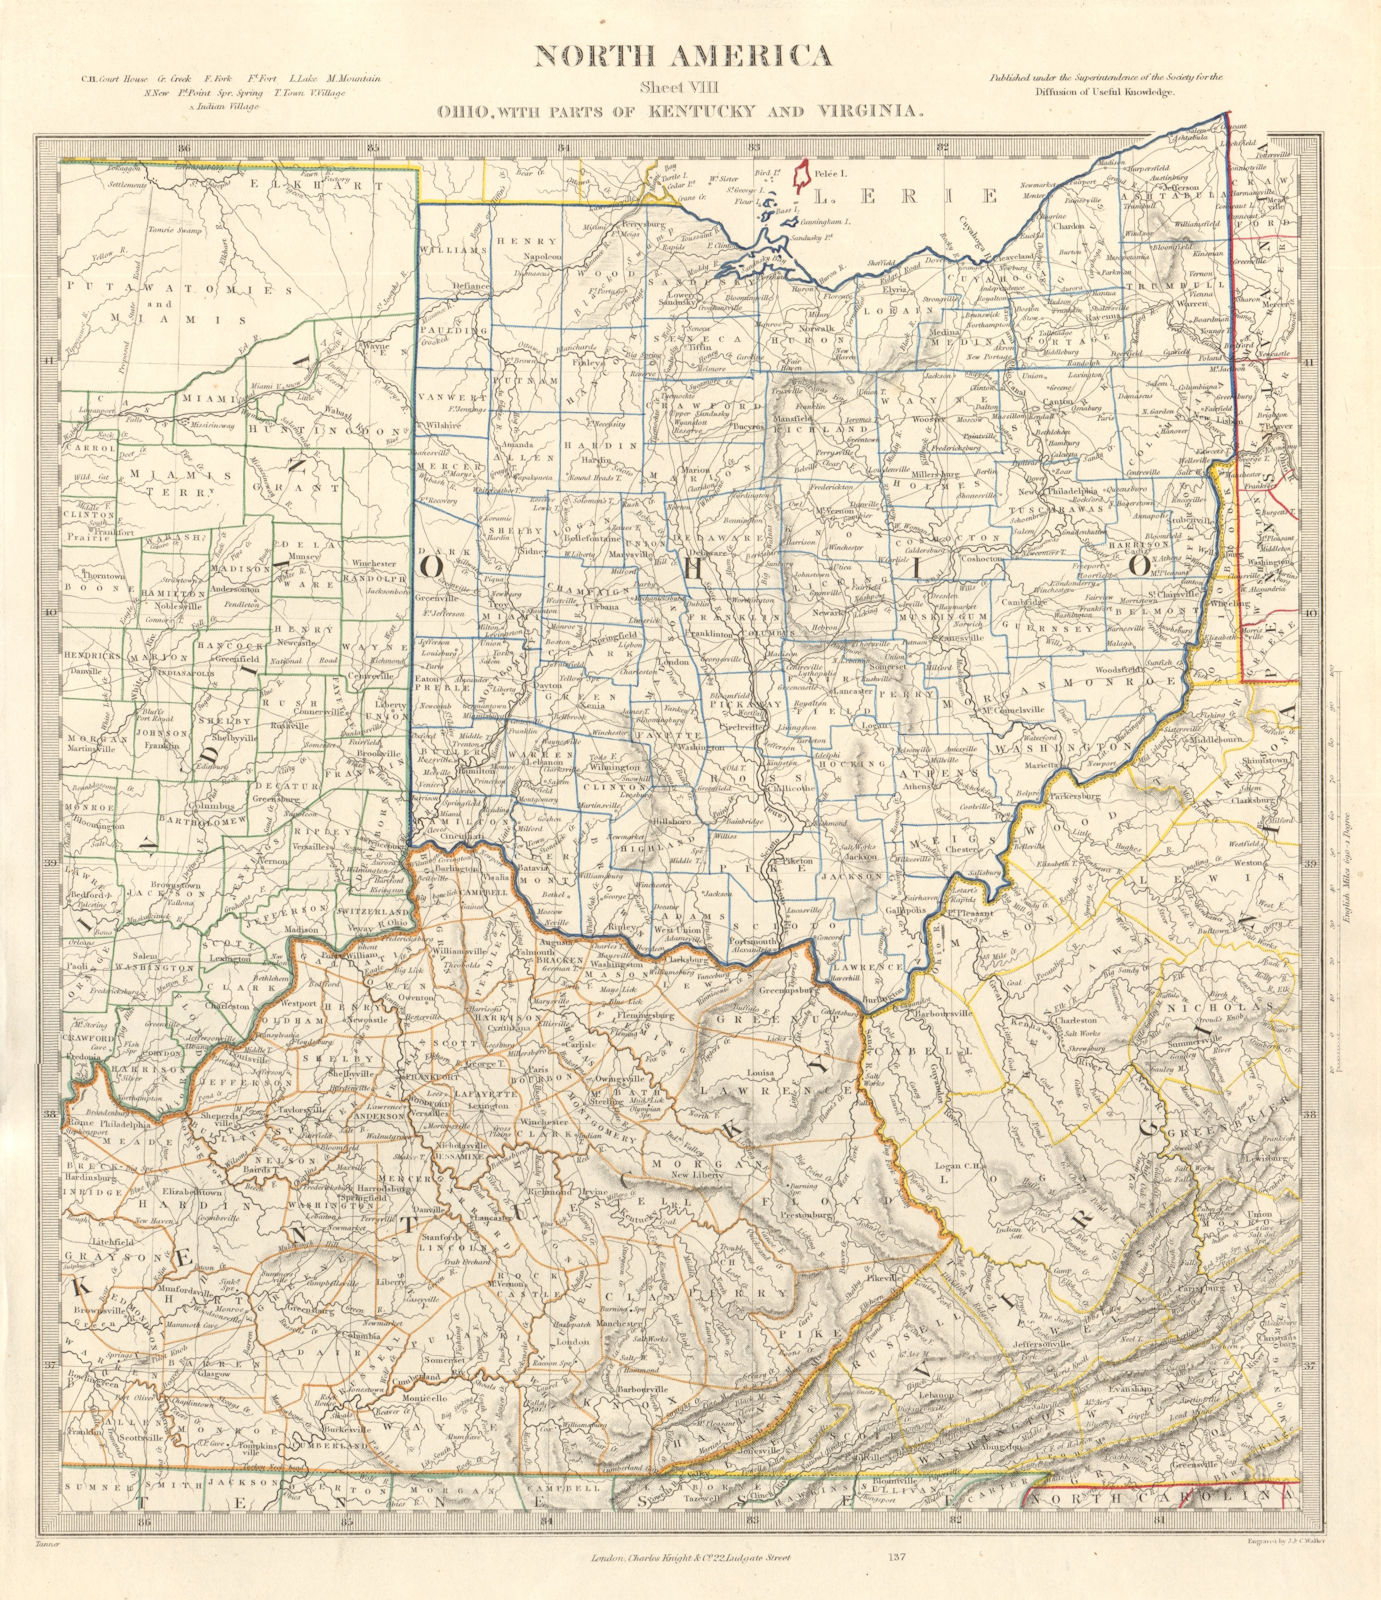 Associate Product USA. Ohio with parts of Kentucky, Virginia & Indiana. Counties. SDUK 1846 map